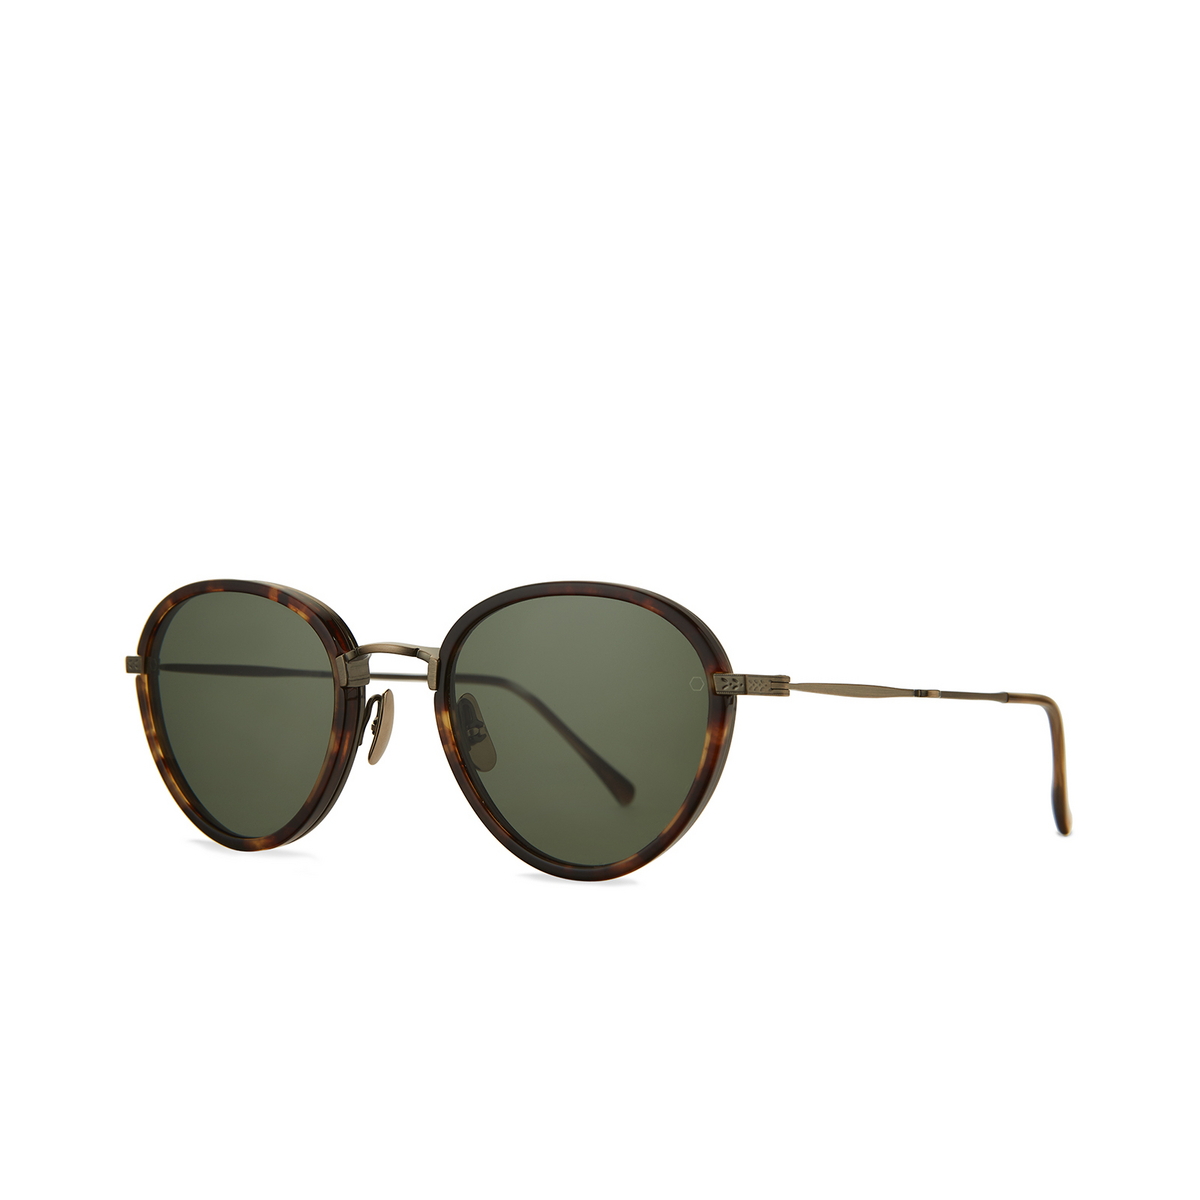 Mr. Leight® Round Sunglasses: Monterey Sl color Maple / Green + Driftwood / Bluelight Mpl/grn+drftwd/blul - three-quarters view.